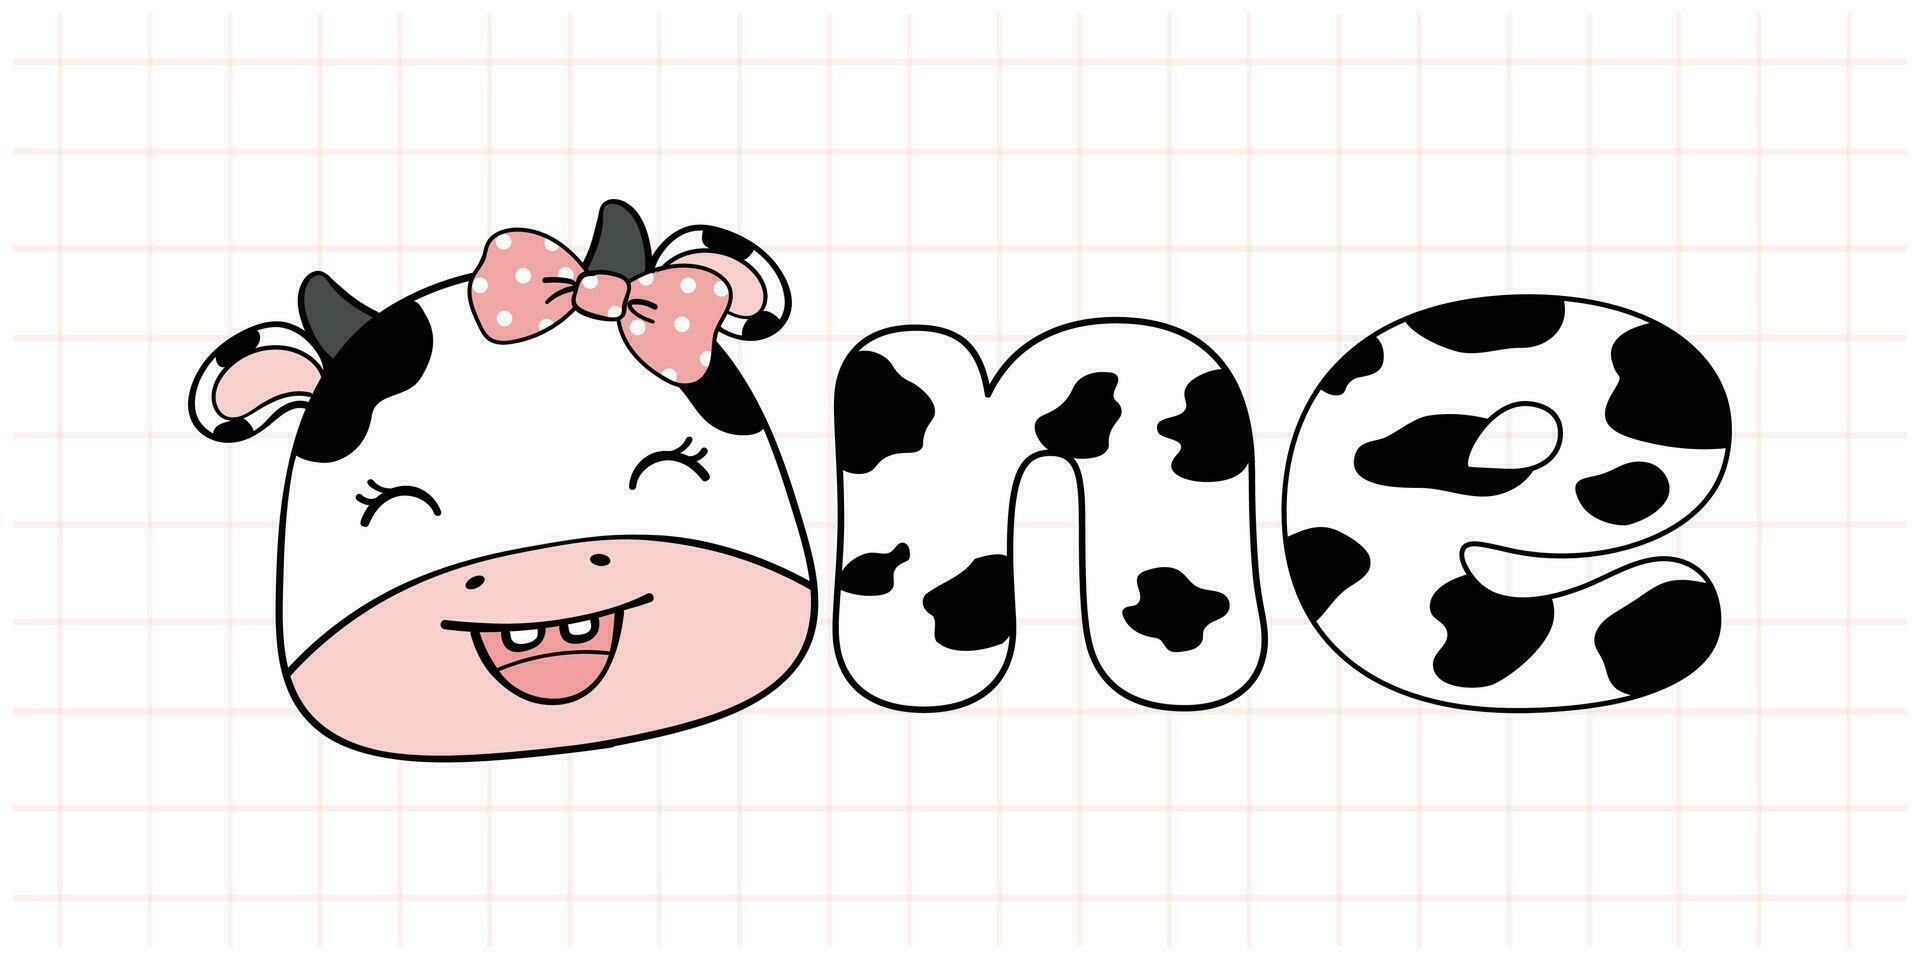 Adorable Cartoon Baby Cow Girl First Birthday, one year Celebration Illustration vector